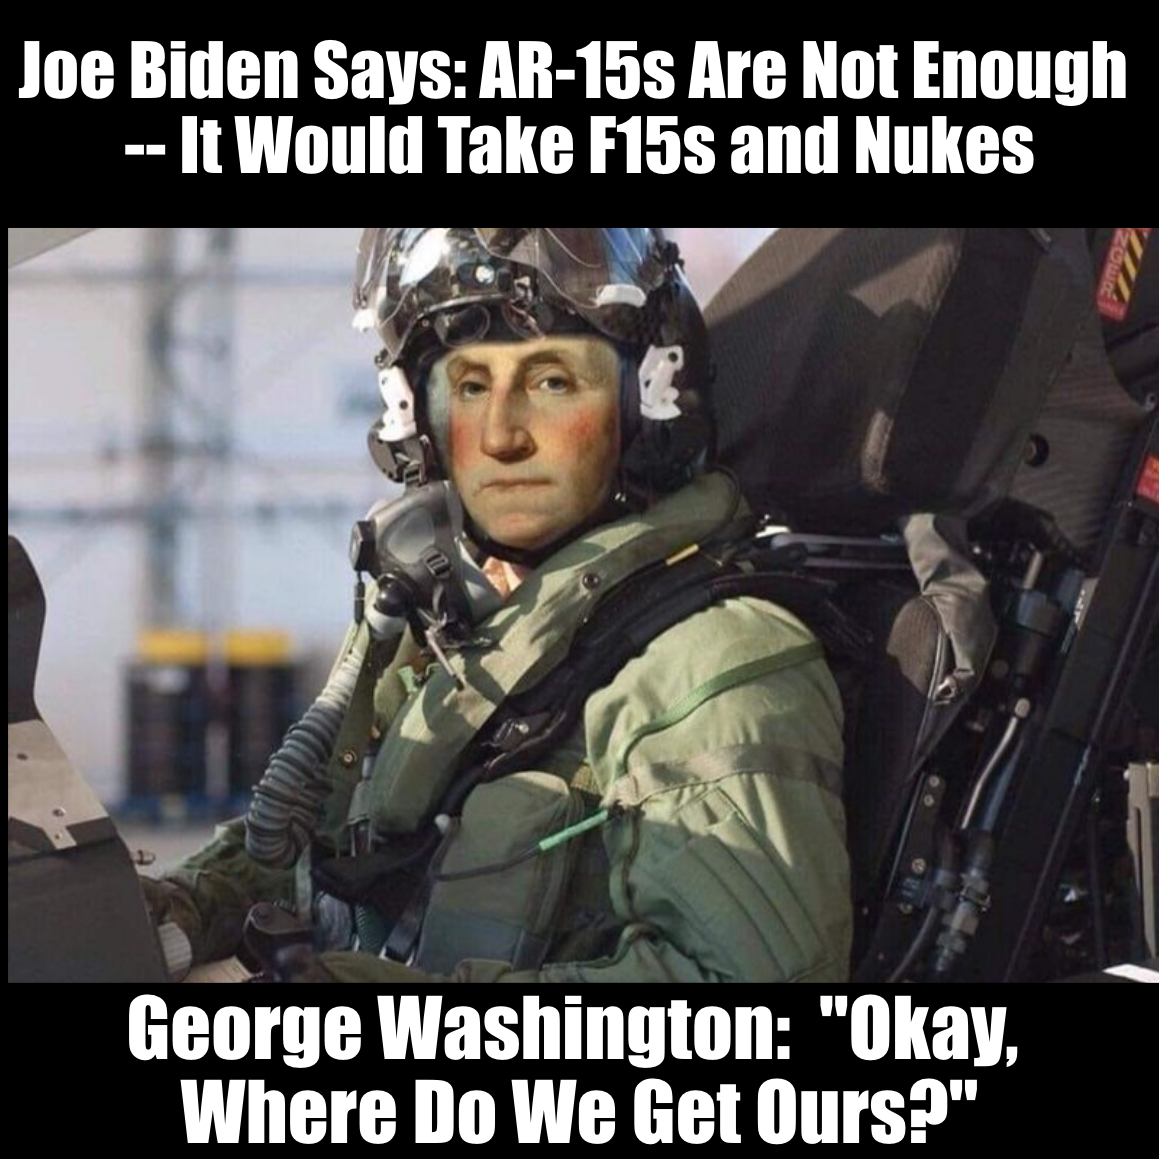 Joe Biden Says: AR-15s Are Not Enough--It Would Take F15s and Nukes.